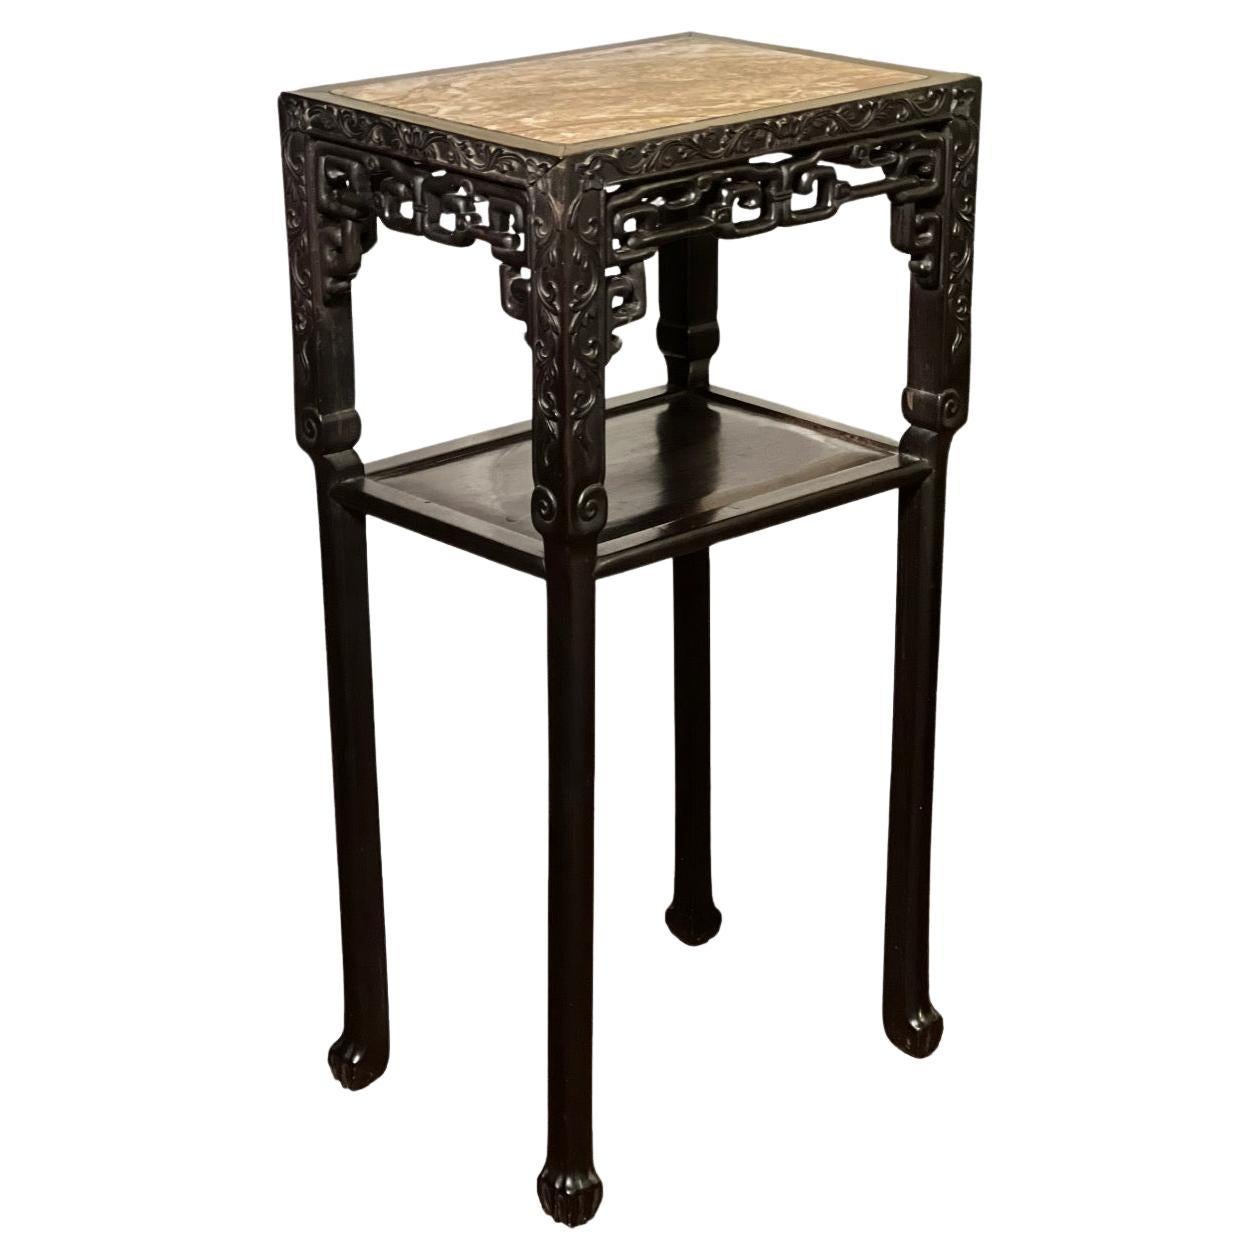 19th Century Chinese Carved Hardwood Two-Tier Marble Top Pedestal Table or Stand For Sale